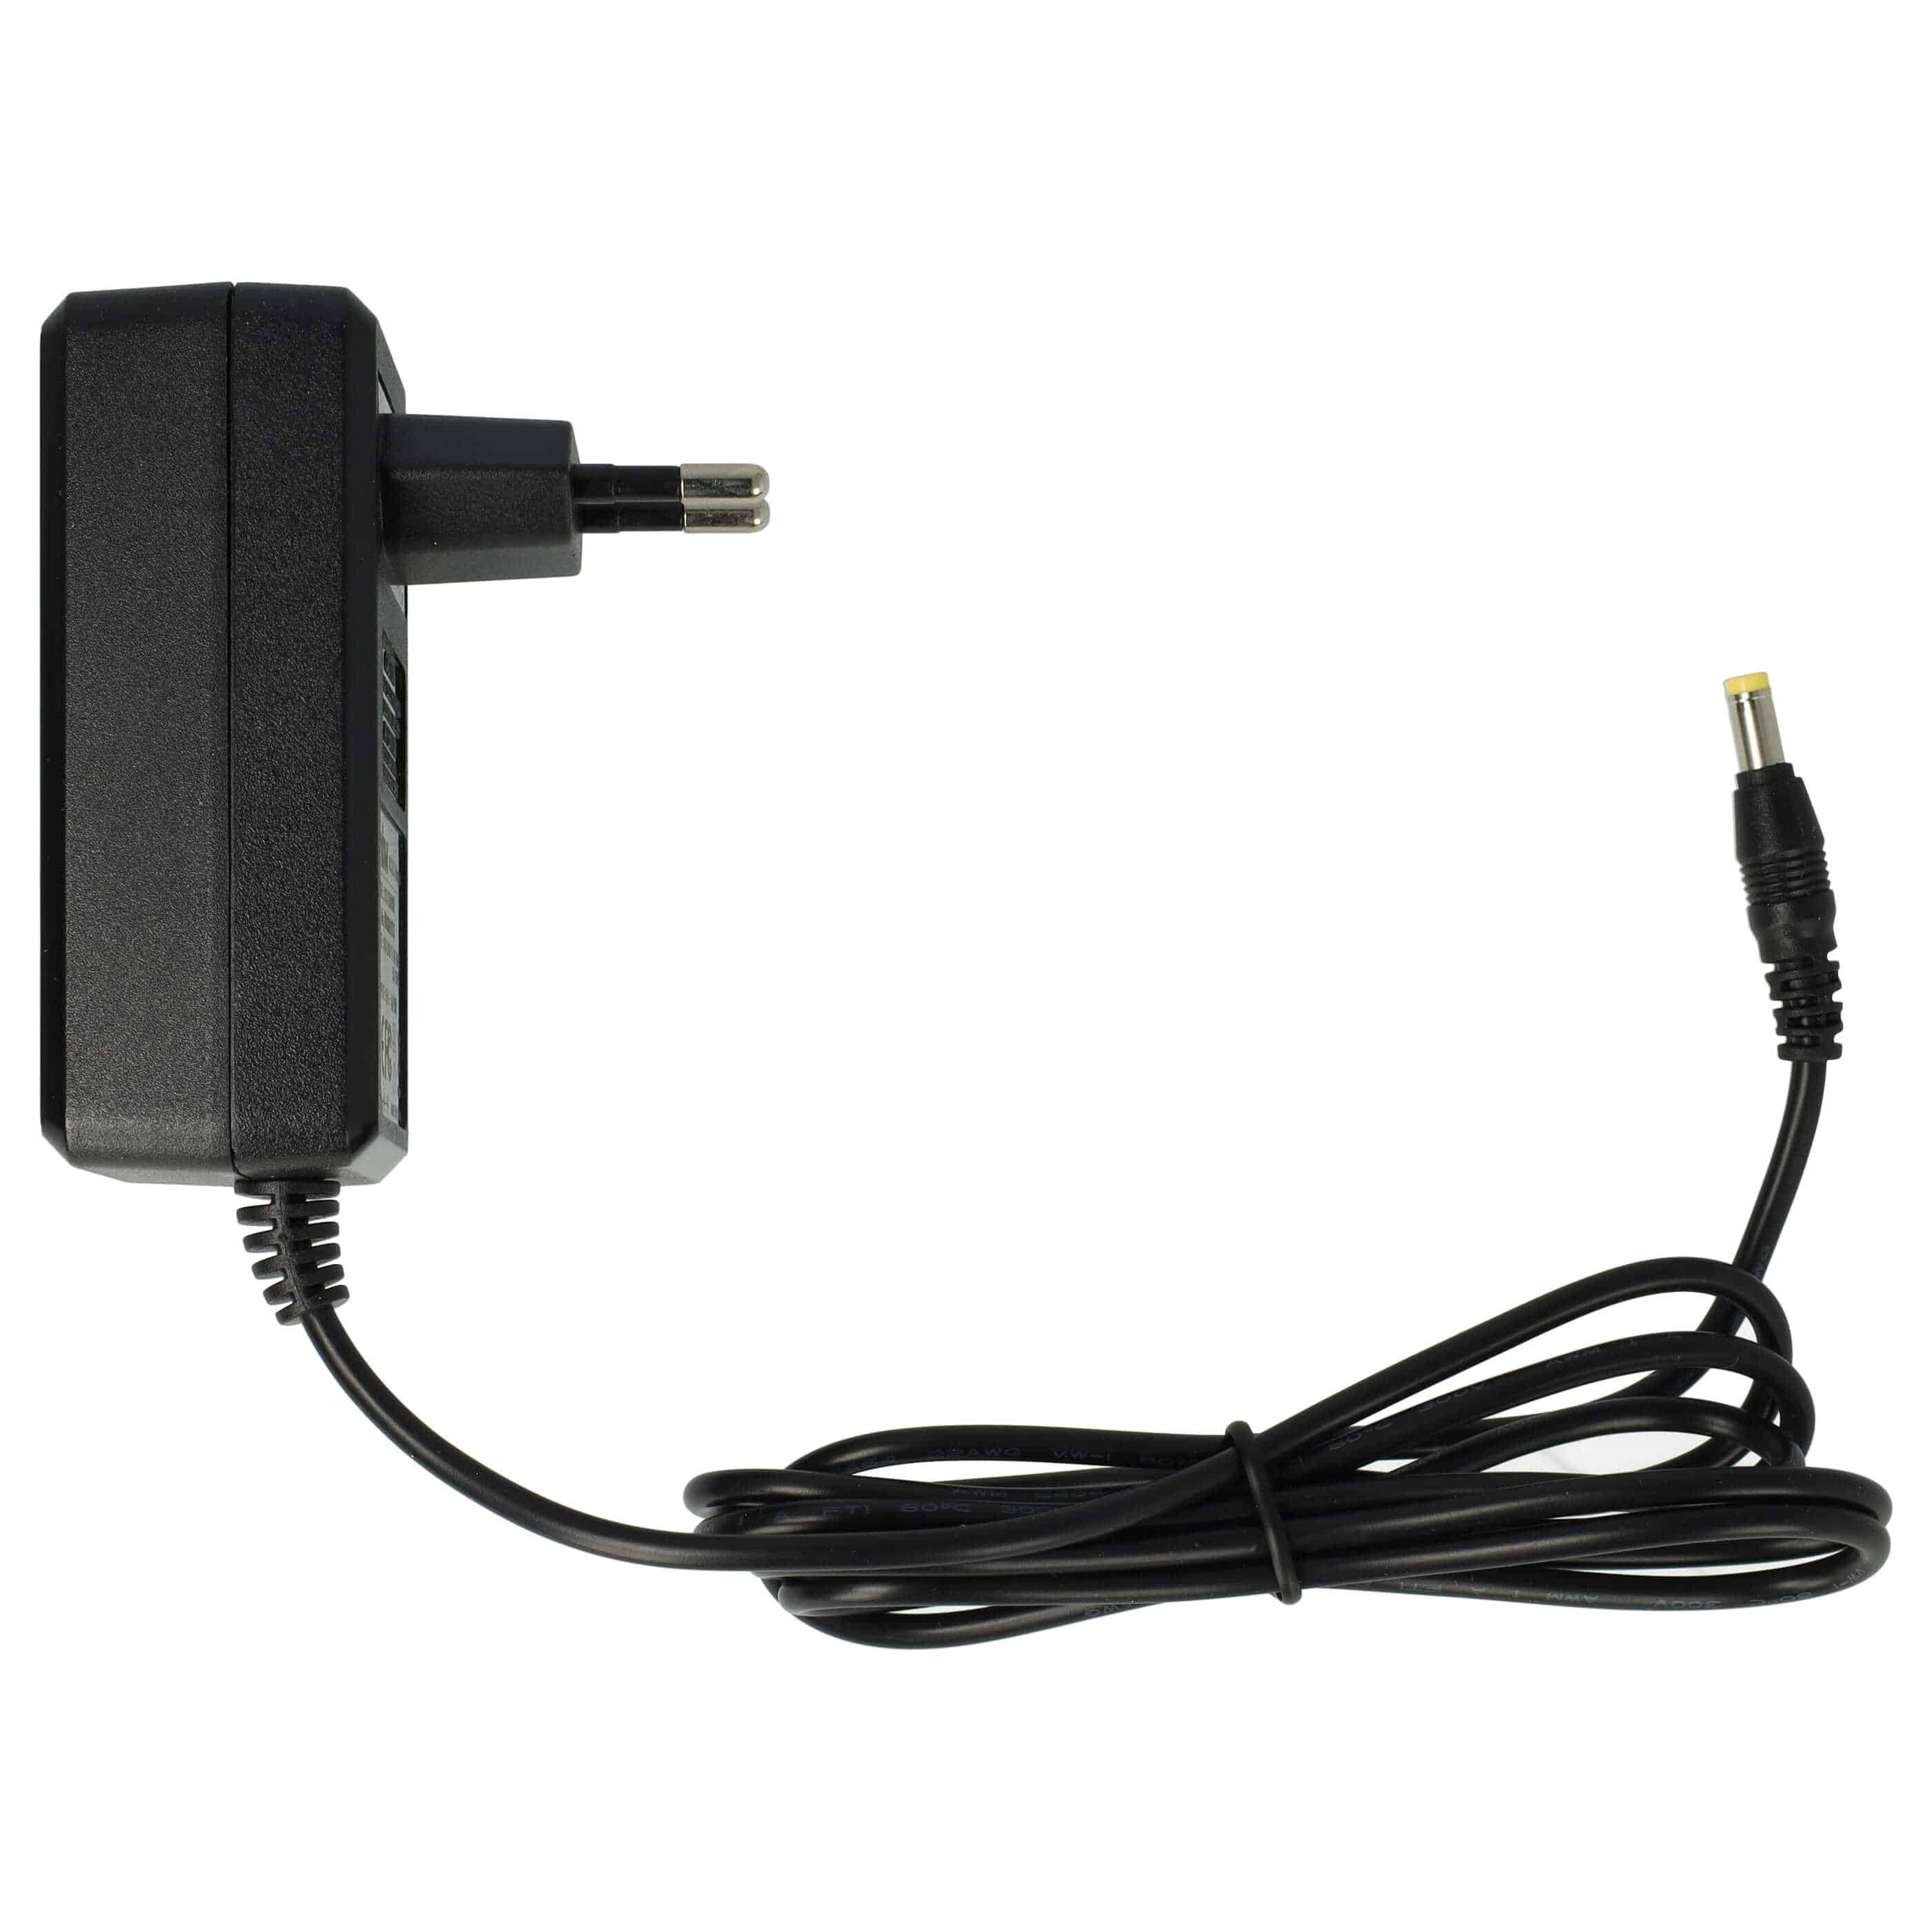 Mains Power Adapter replaces Cisco ENG 3A-152VVT15 for Cisco router - 140 cm